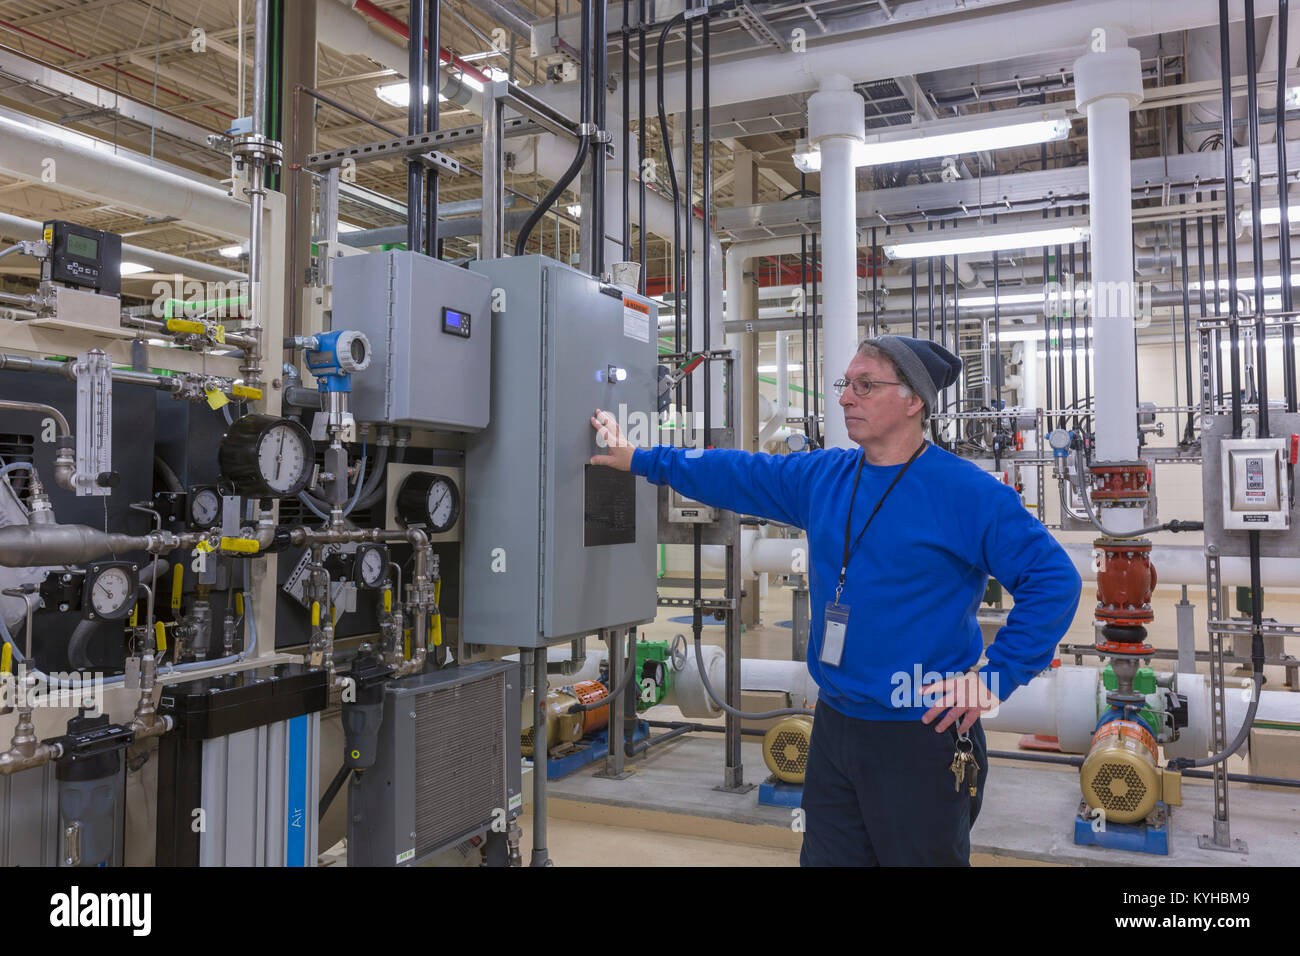 Water department engineer standing in chemical treatment room Stock Photo